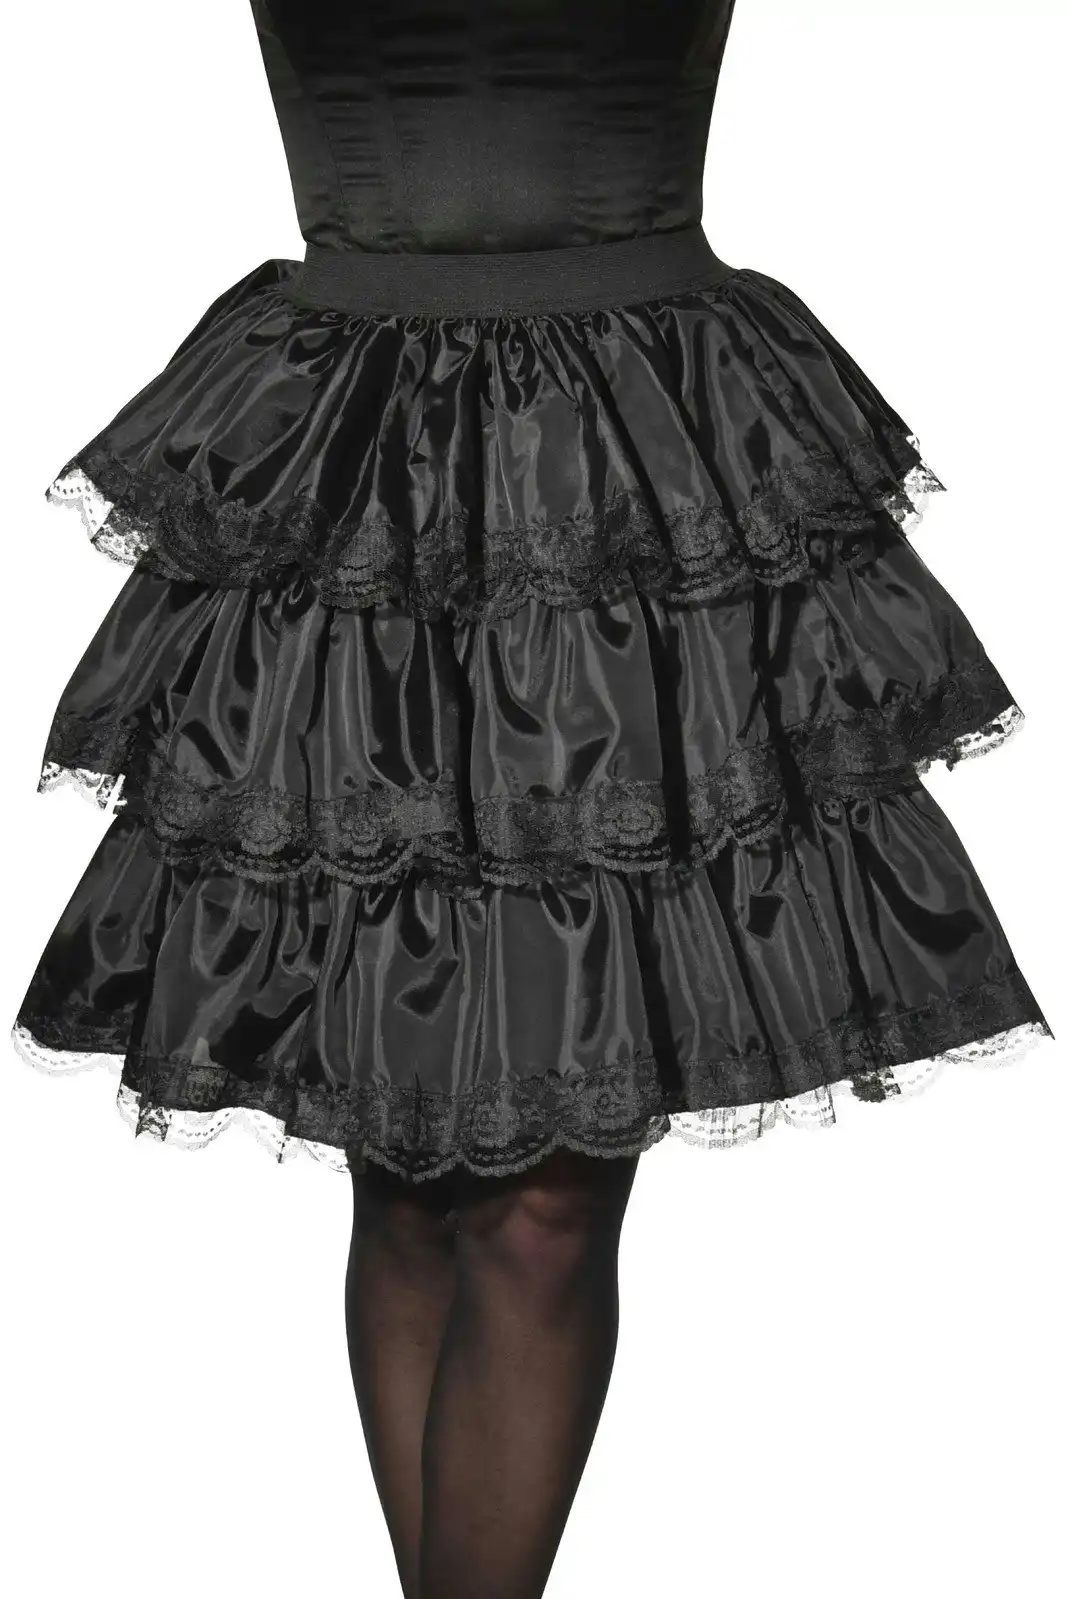 Rubies Halloween Spooky Scary Witch Black Ruffle Skirt One Size Adult Women